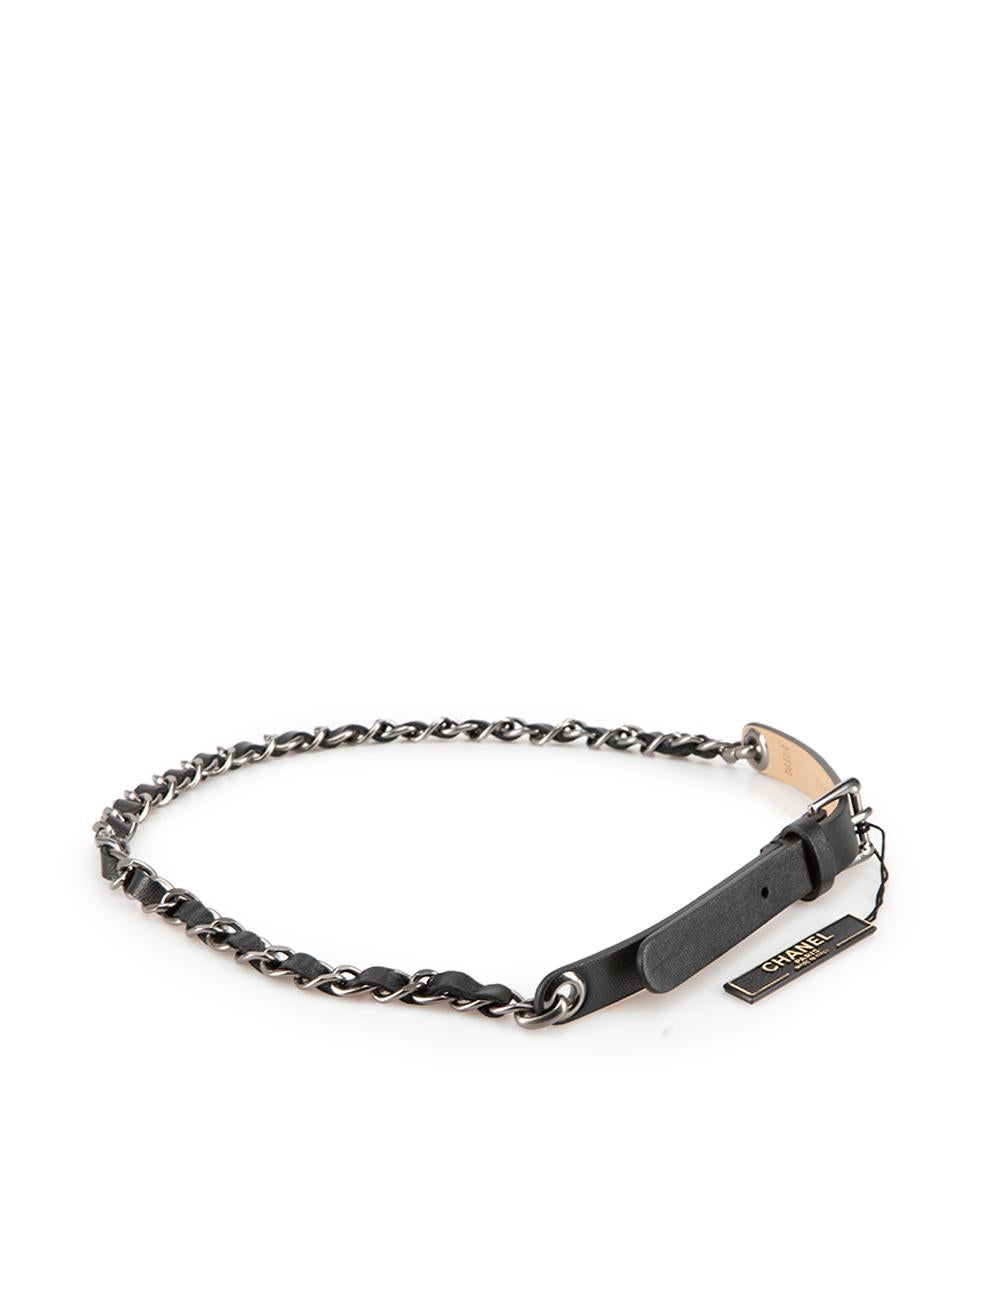 CONDITION is Never worn, with tags. No visible wear to belt is evident on this new Chanel designer resale item.



Details


Black

Leather

Skinny belt

Silver tone hardware

Metal chain woven detail



 

Made in Italy 

 

Composition

EXTERIOR: